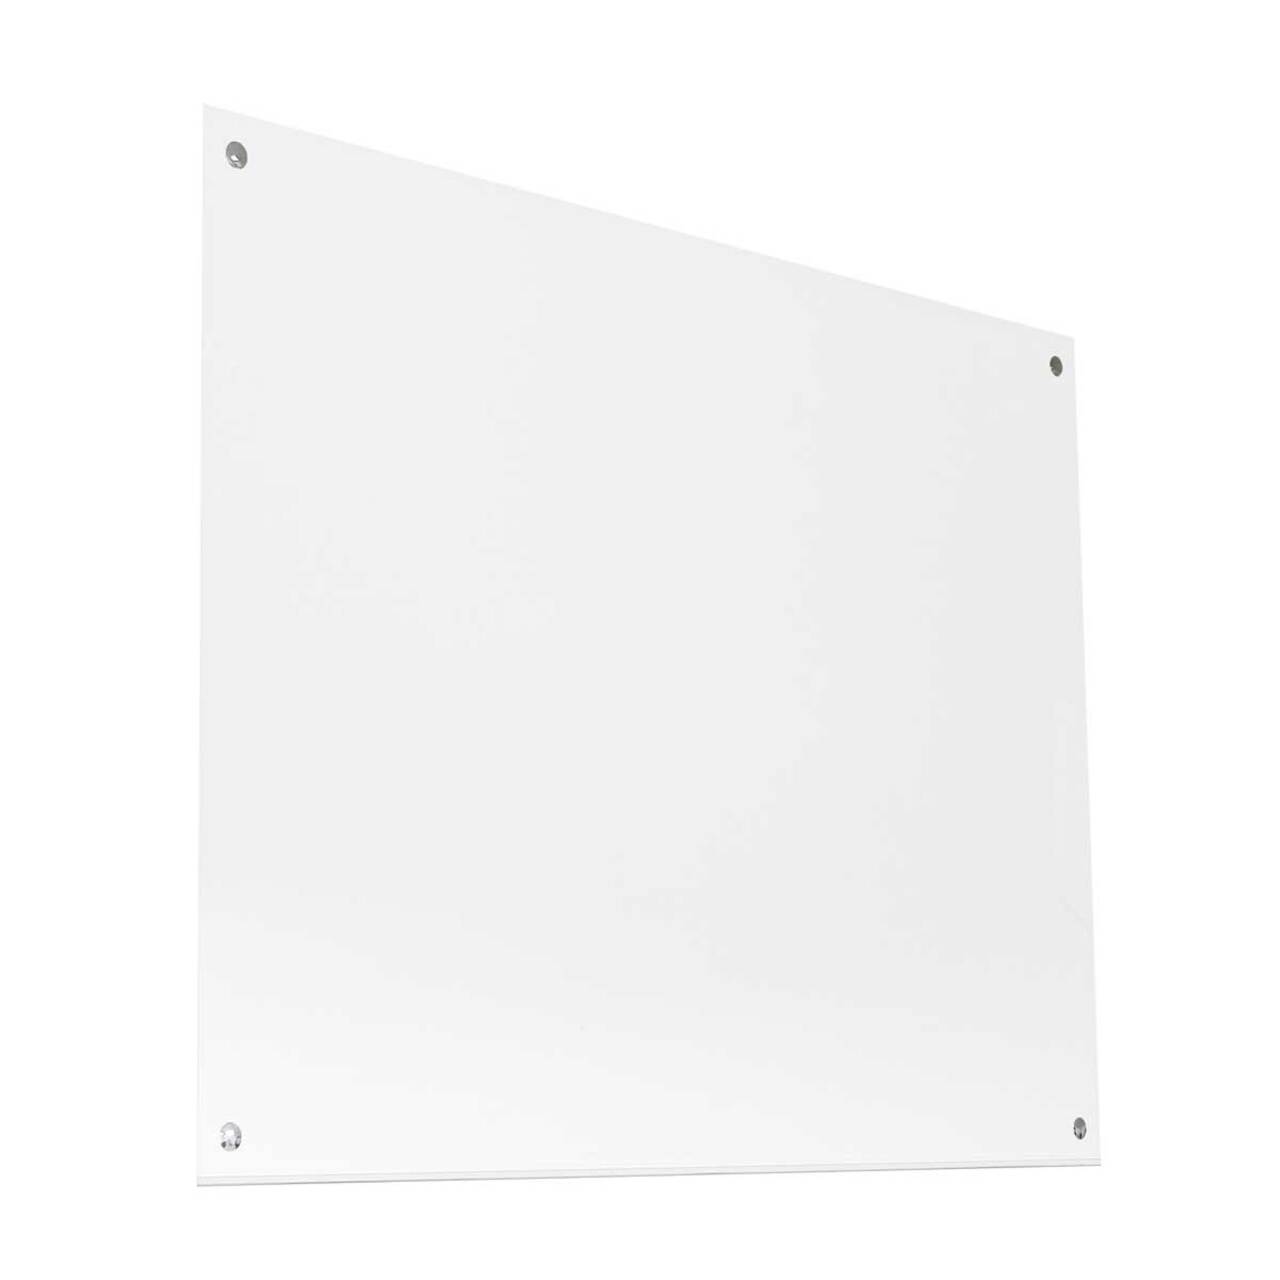 Acrylic Poster Frame A2, JJ DISPLAYS, 420 x 594 mm